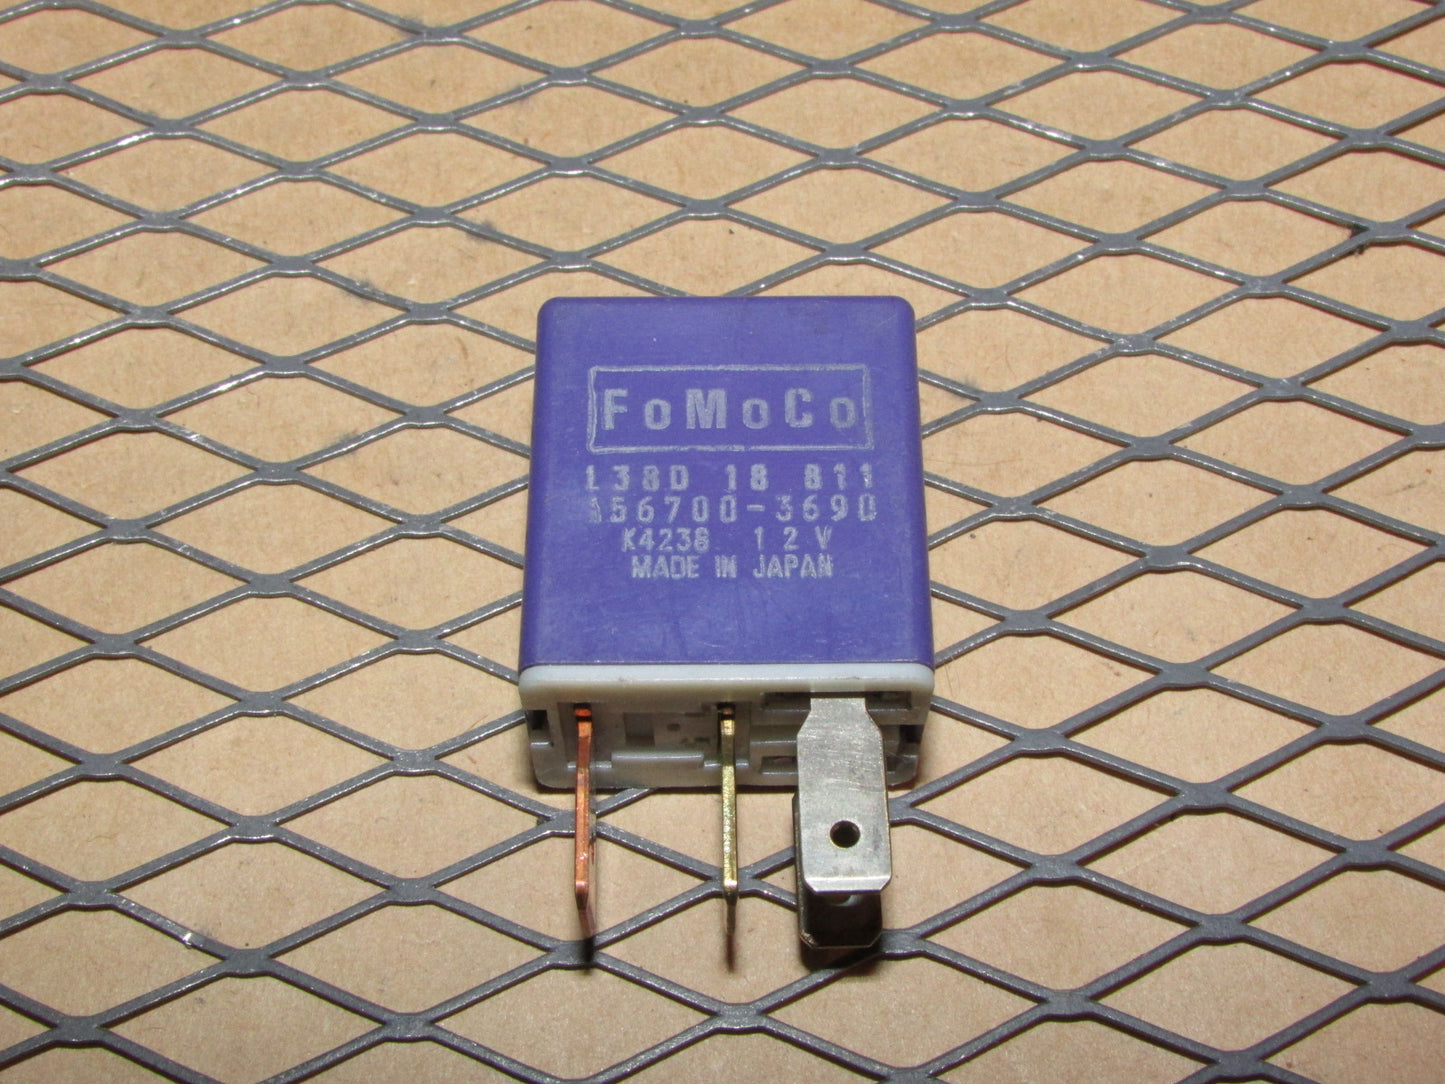 Ford Relay L38D 18 811 / 156700-3690